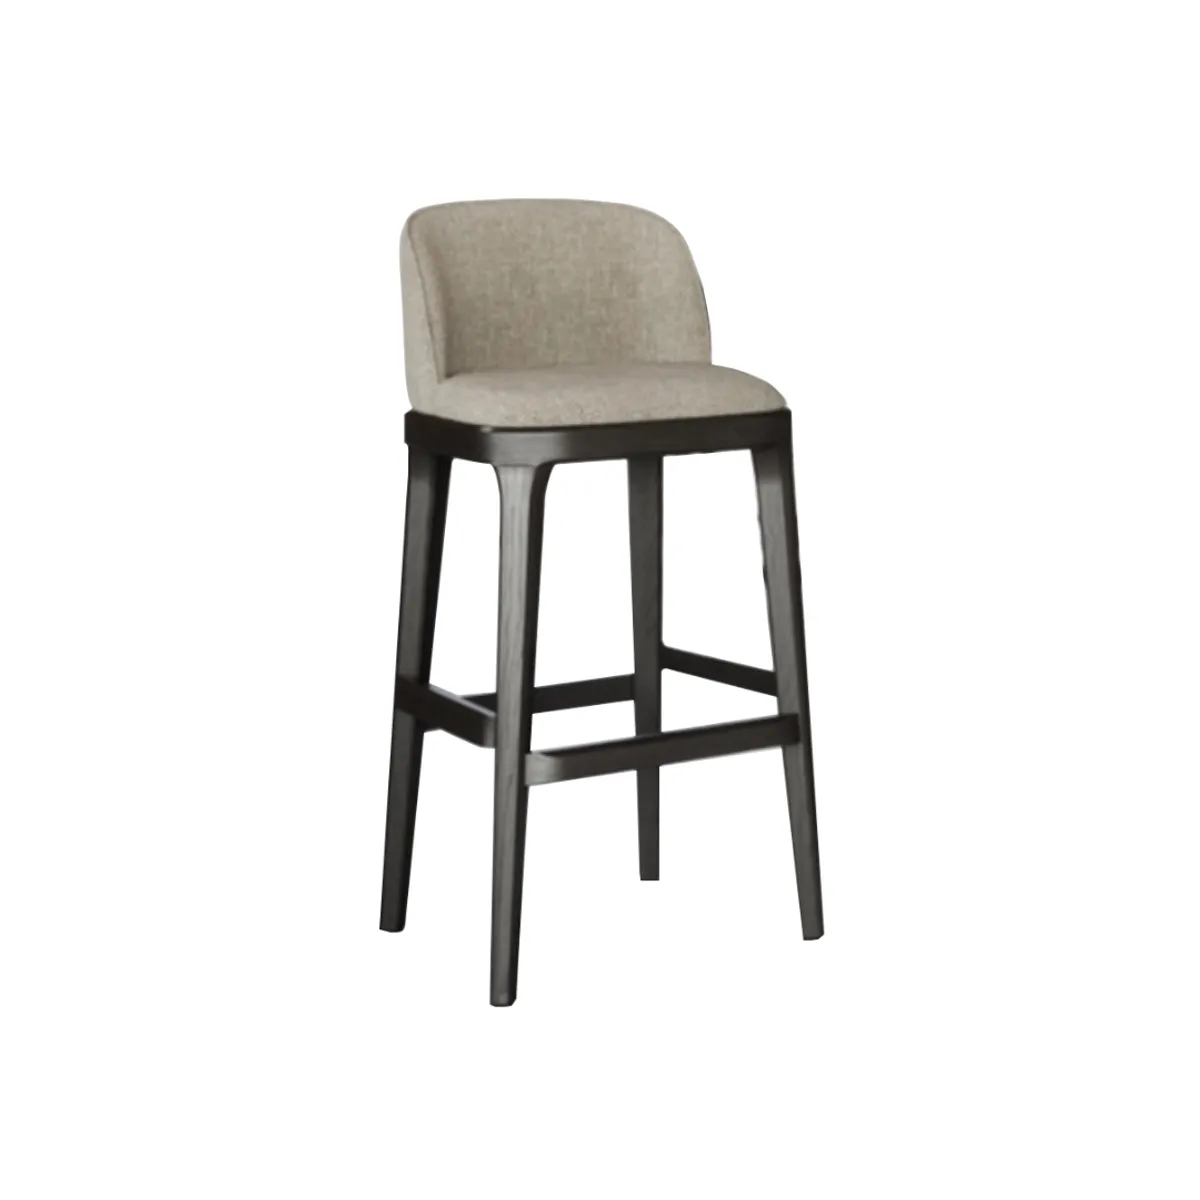 Andy counter stool